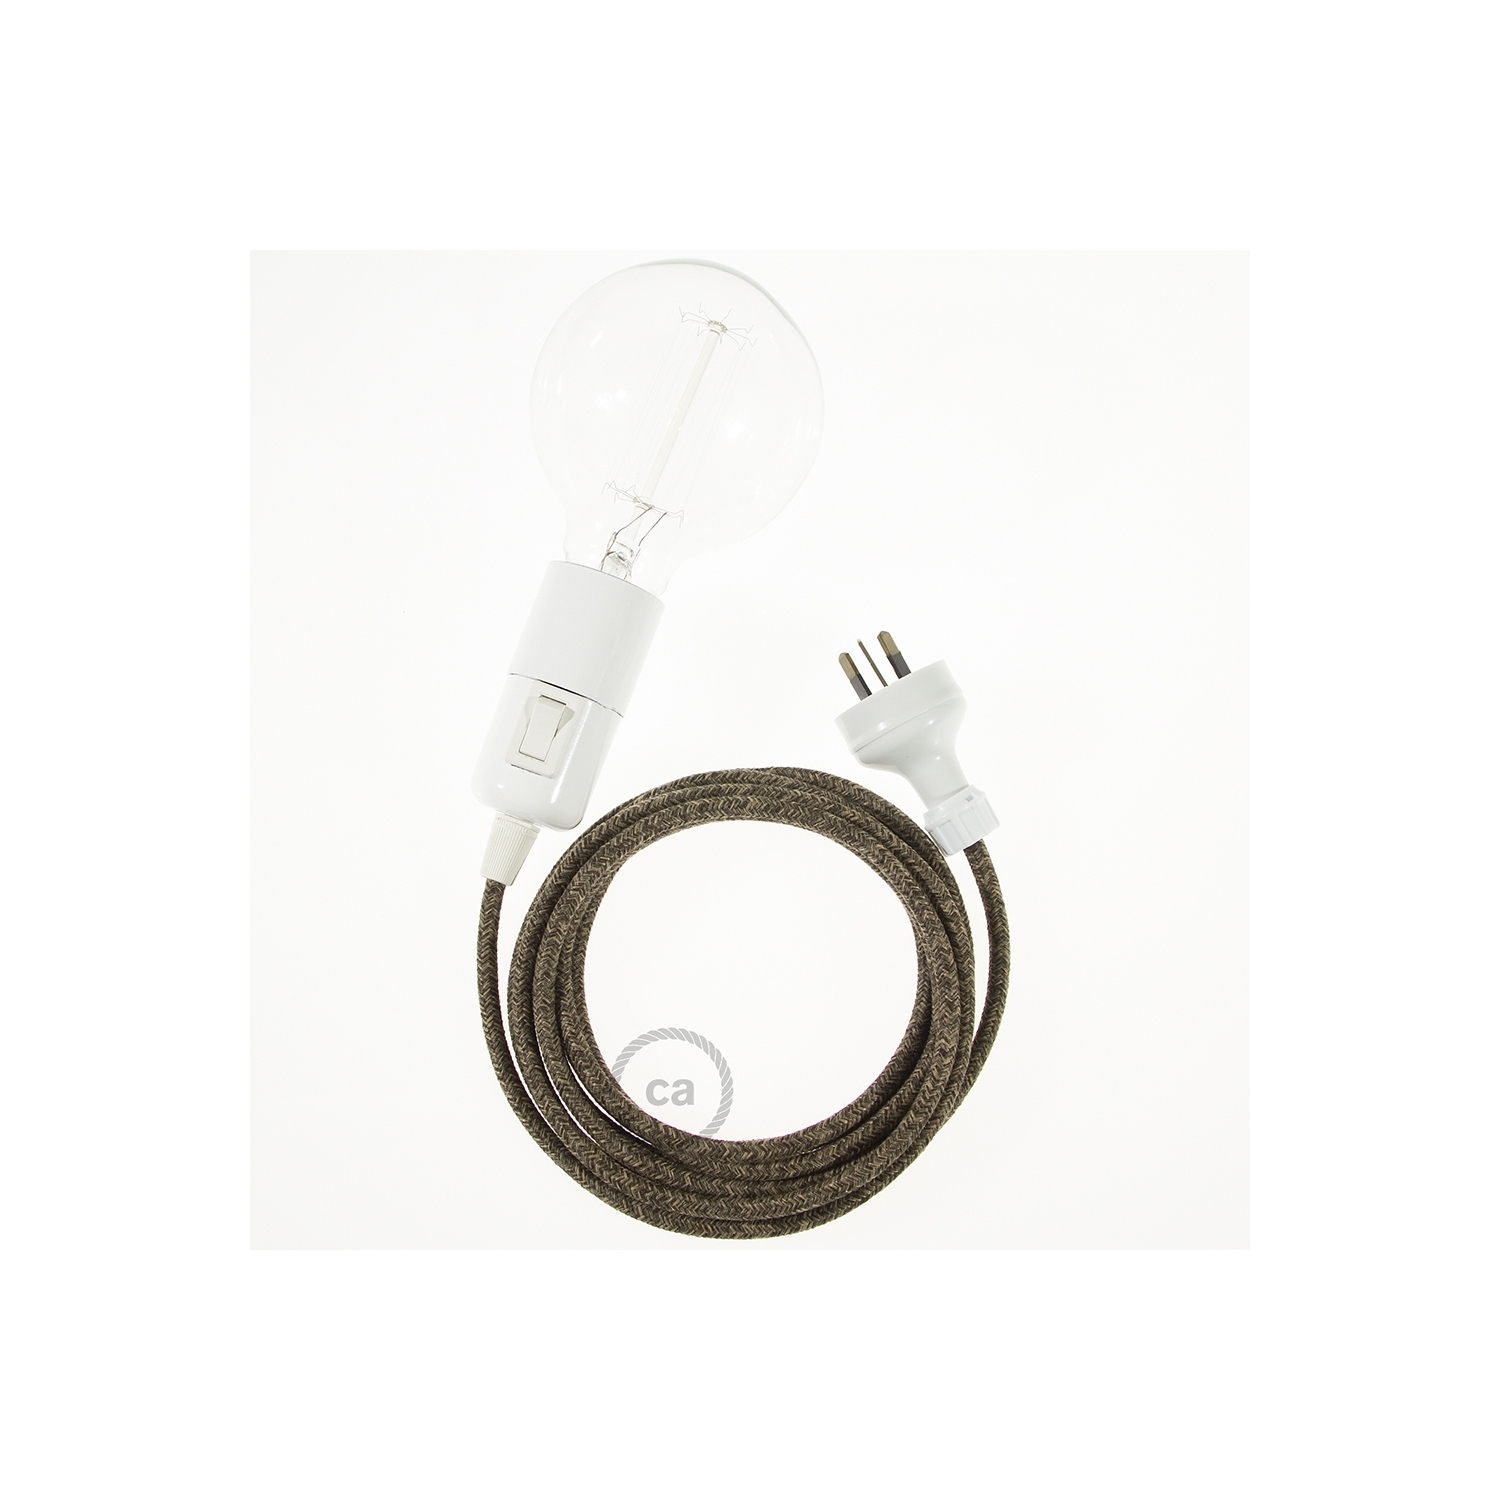 Create your RN04 Brown Natural Linen Snake and bring the light wherever you want.